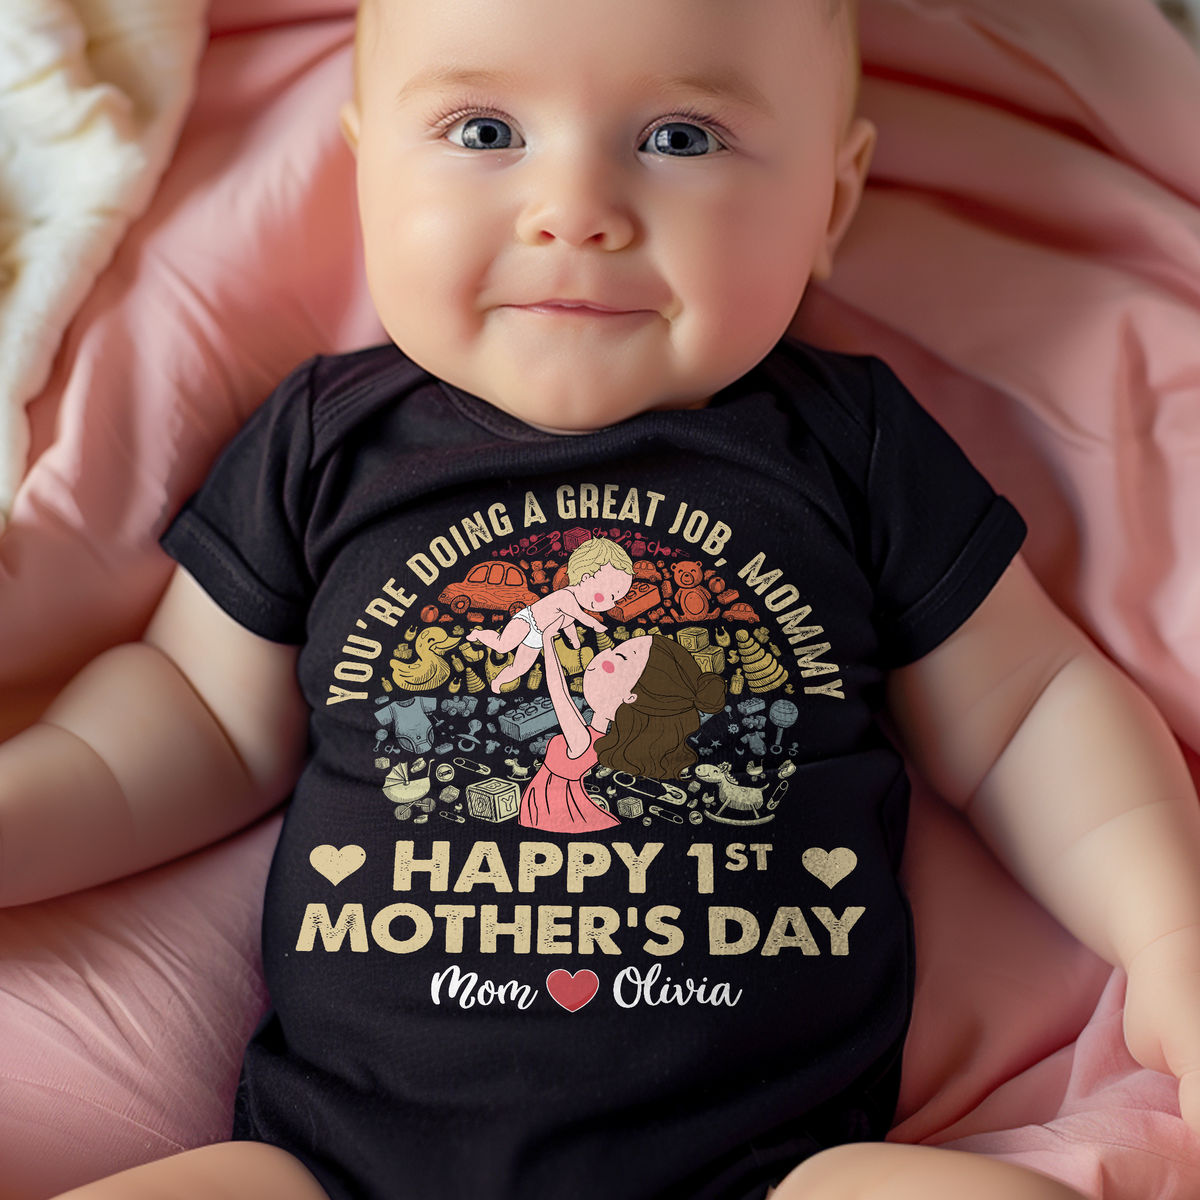 Custom Baby Onesies - You're doing a great job mommy - Happy 1st Mother's Day (43375) - Personalized Onesie